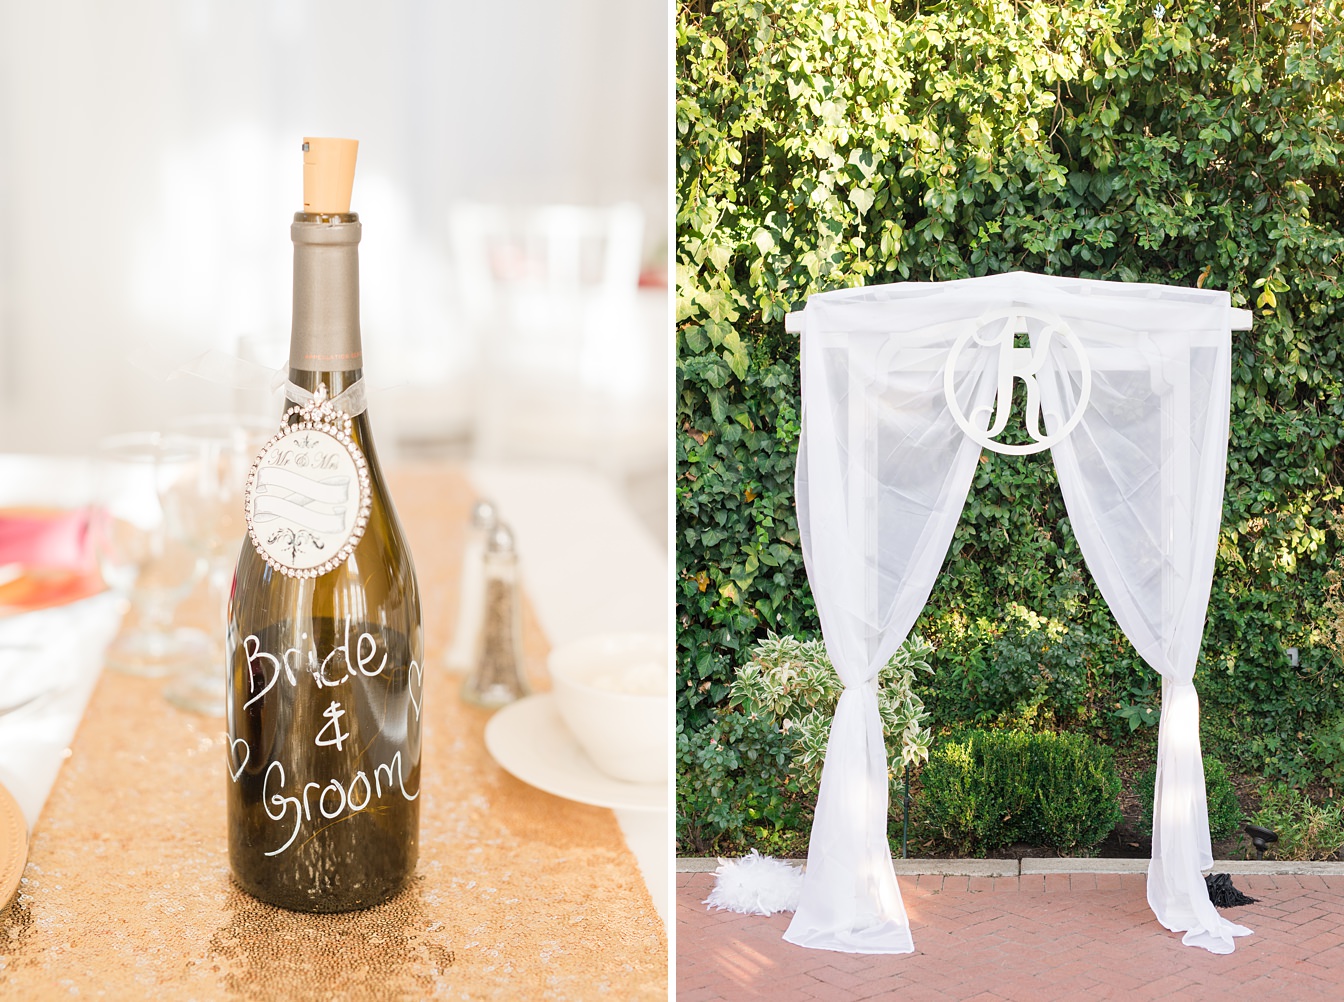 Reception Decor by Adrienne and Dani Photography